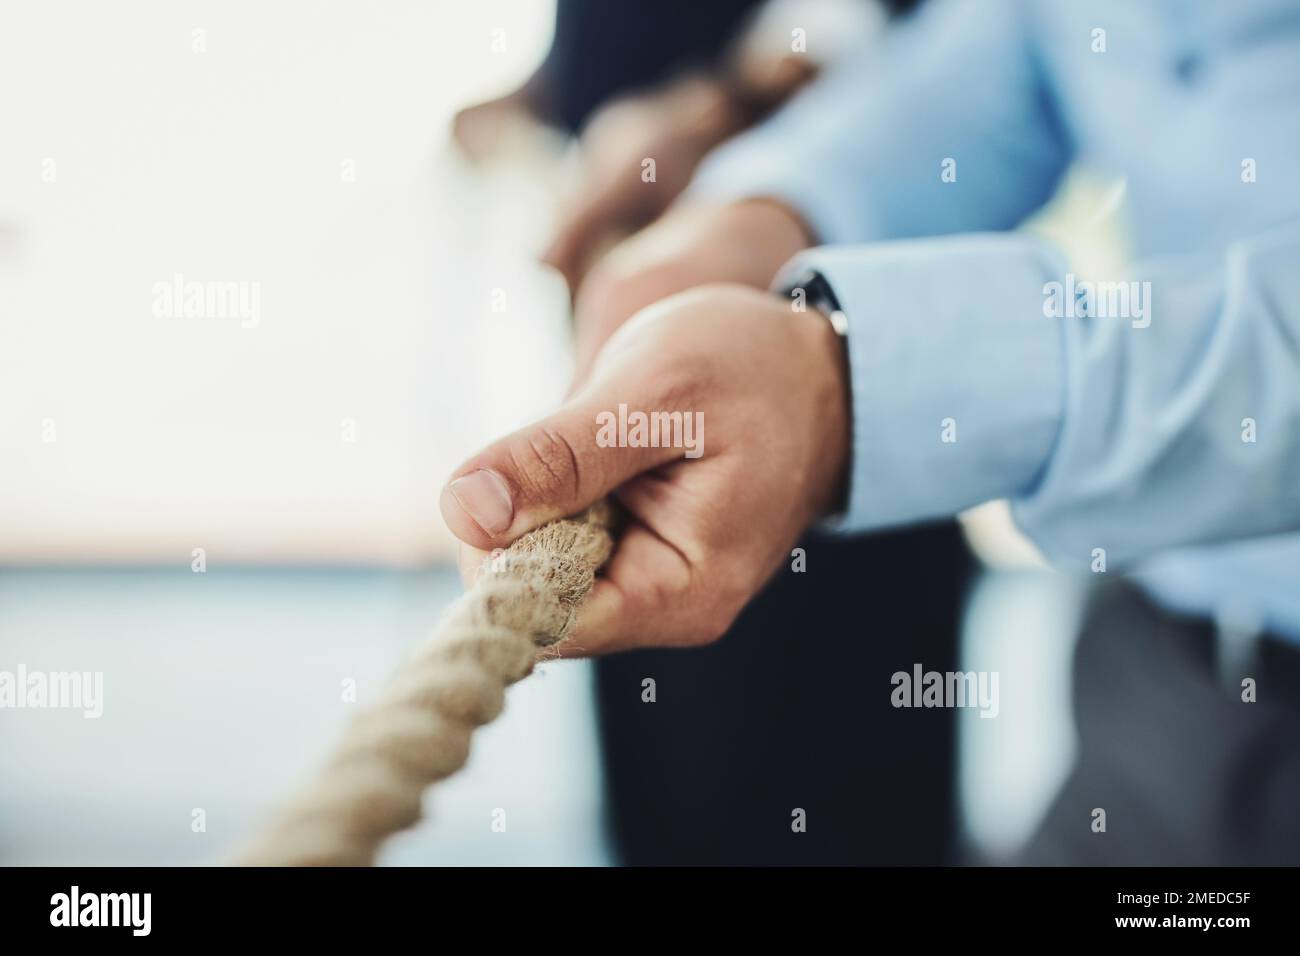 Person pulling rope, close-up stock photo